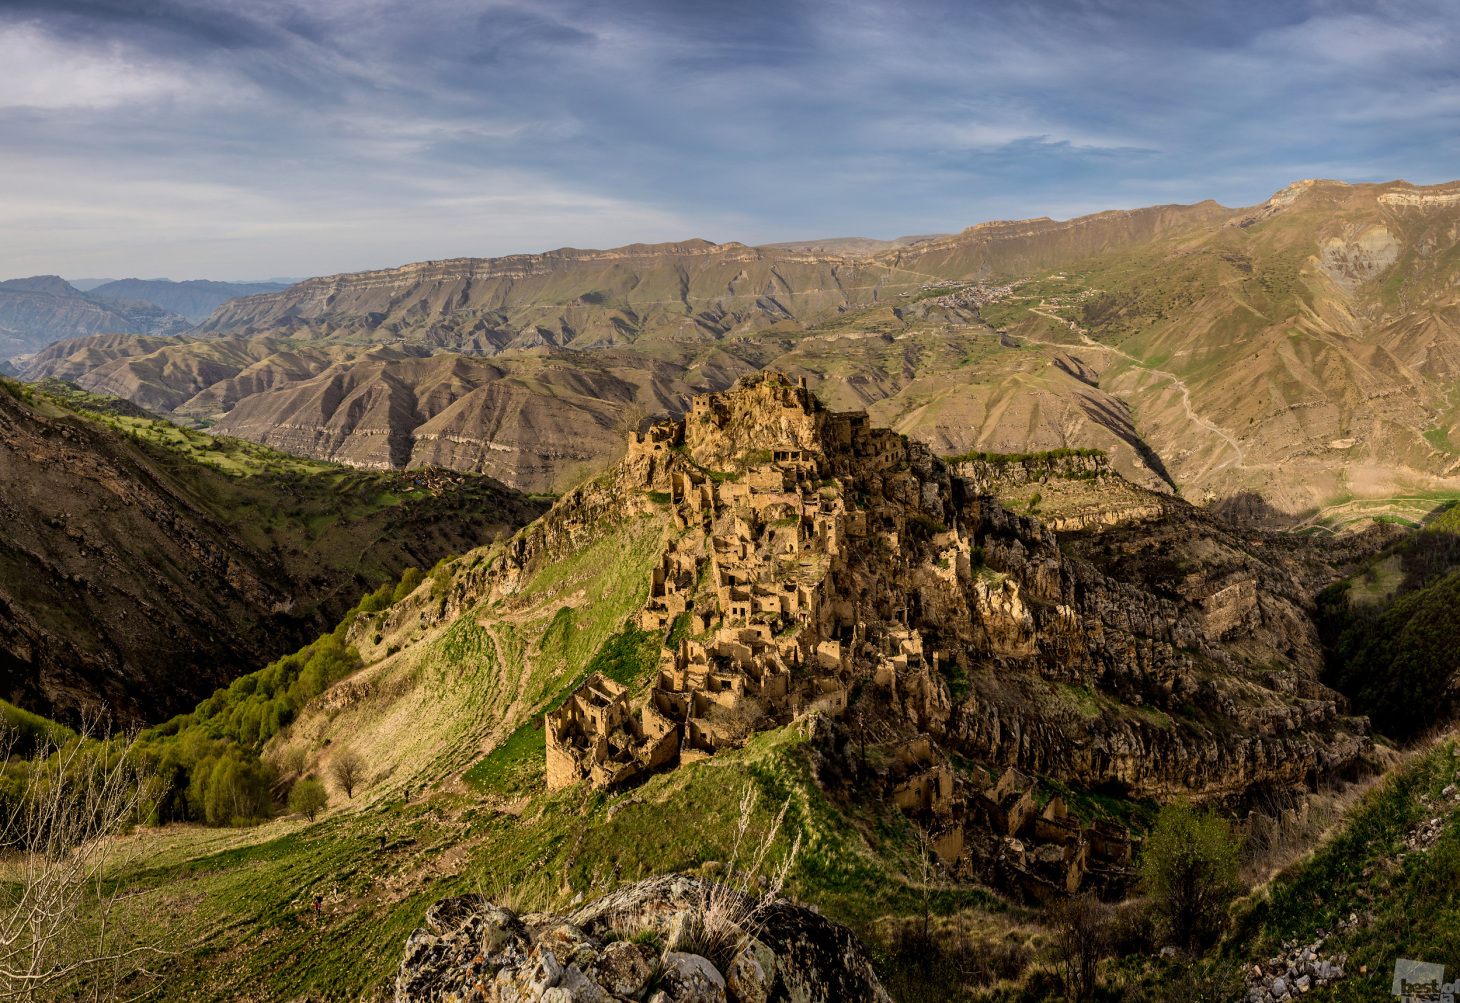 The ghost village of Gamsutl is an abandoned ancient Avar settlement in Dagestan, North Caucasus. The village, which is carved in rock atop a 4600-feet high mountain, is barely noticeable these days. 